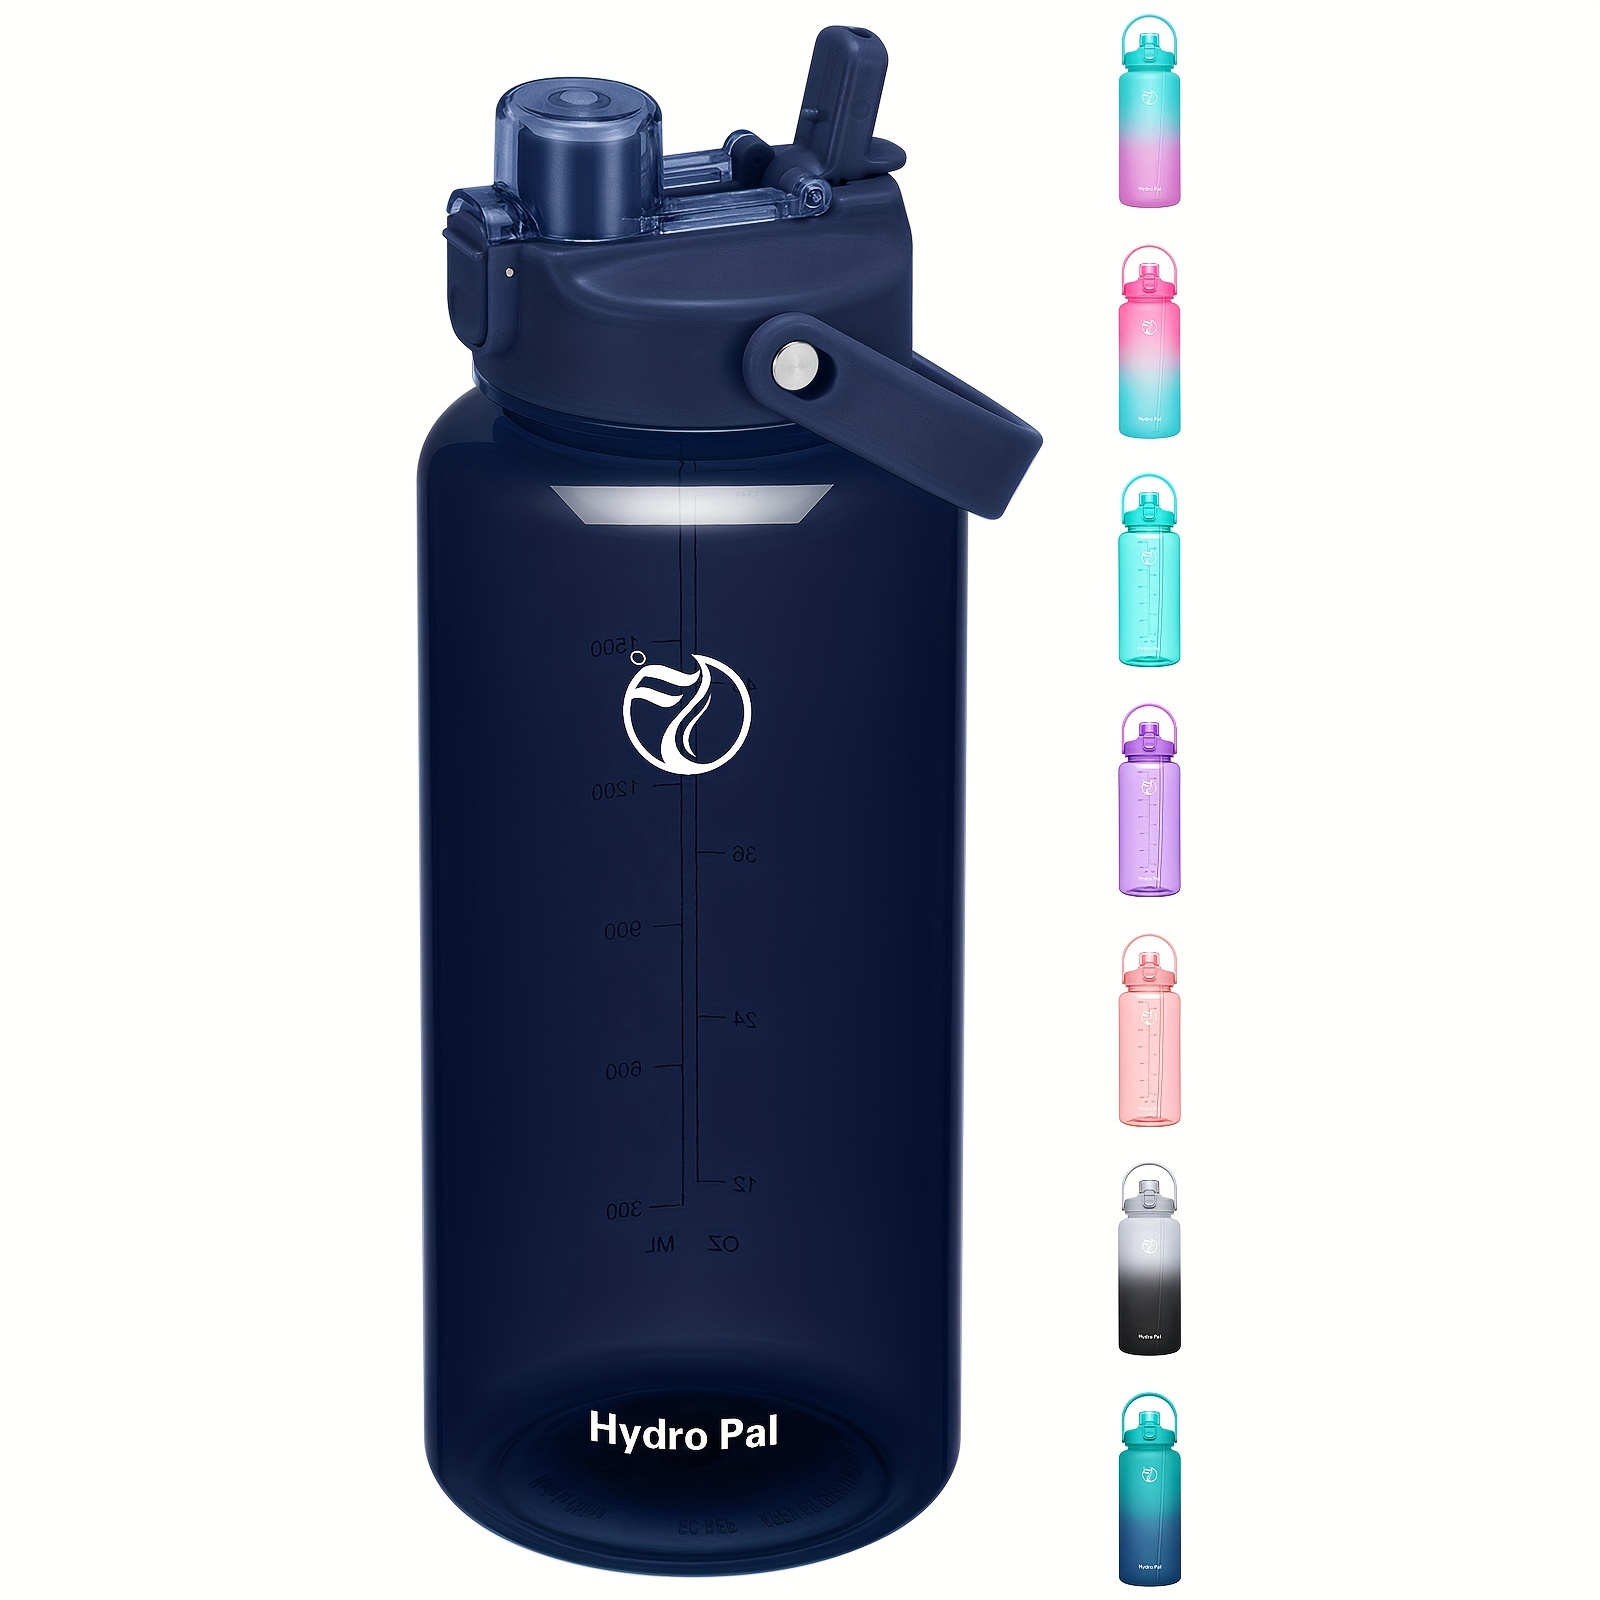 

1pc Hydro Pal 74oz Large Capacity Water Bottle - Half Gallon, Dual-function Spout And Straw Lid, Ergonomic Handle, One-click Open, Measurement Scale